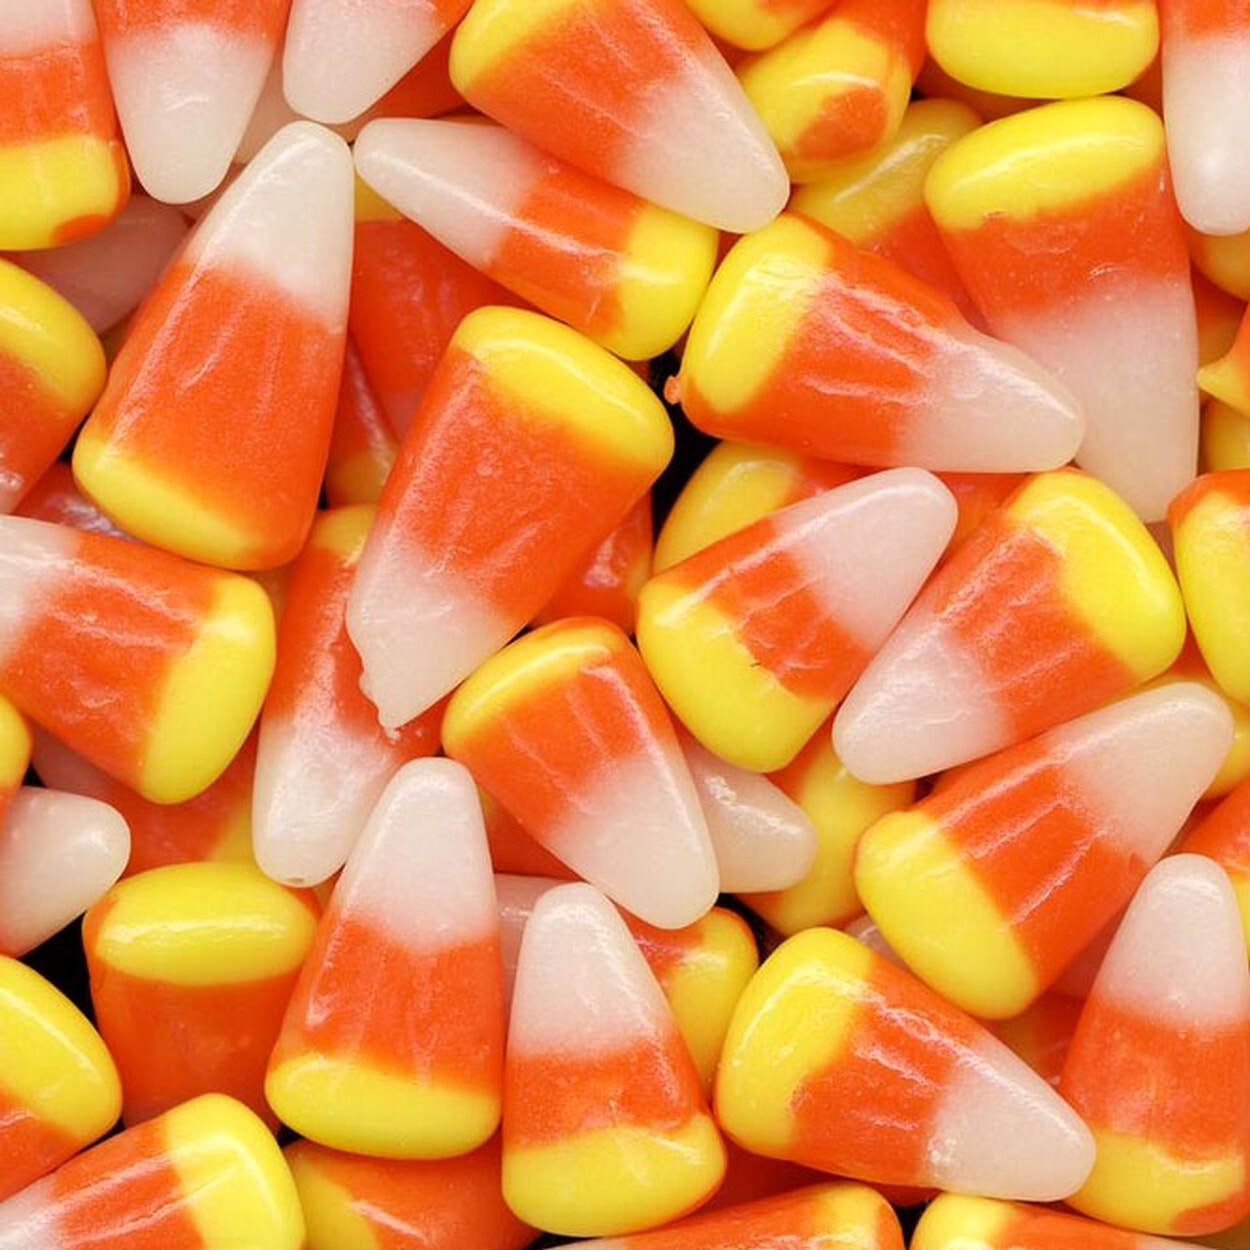 Jelly Belly Brand Candy Corn - 8 oz Bag